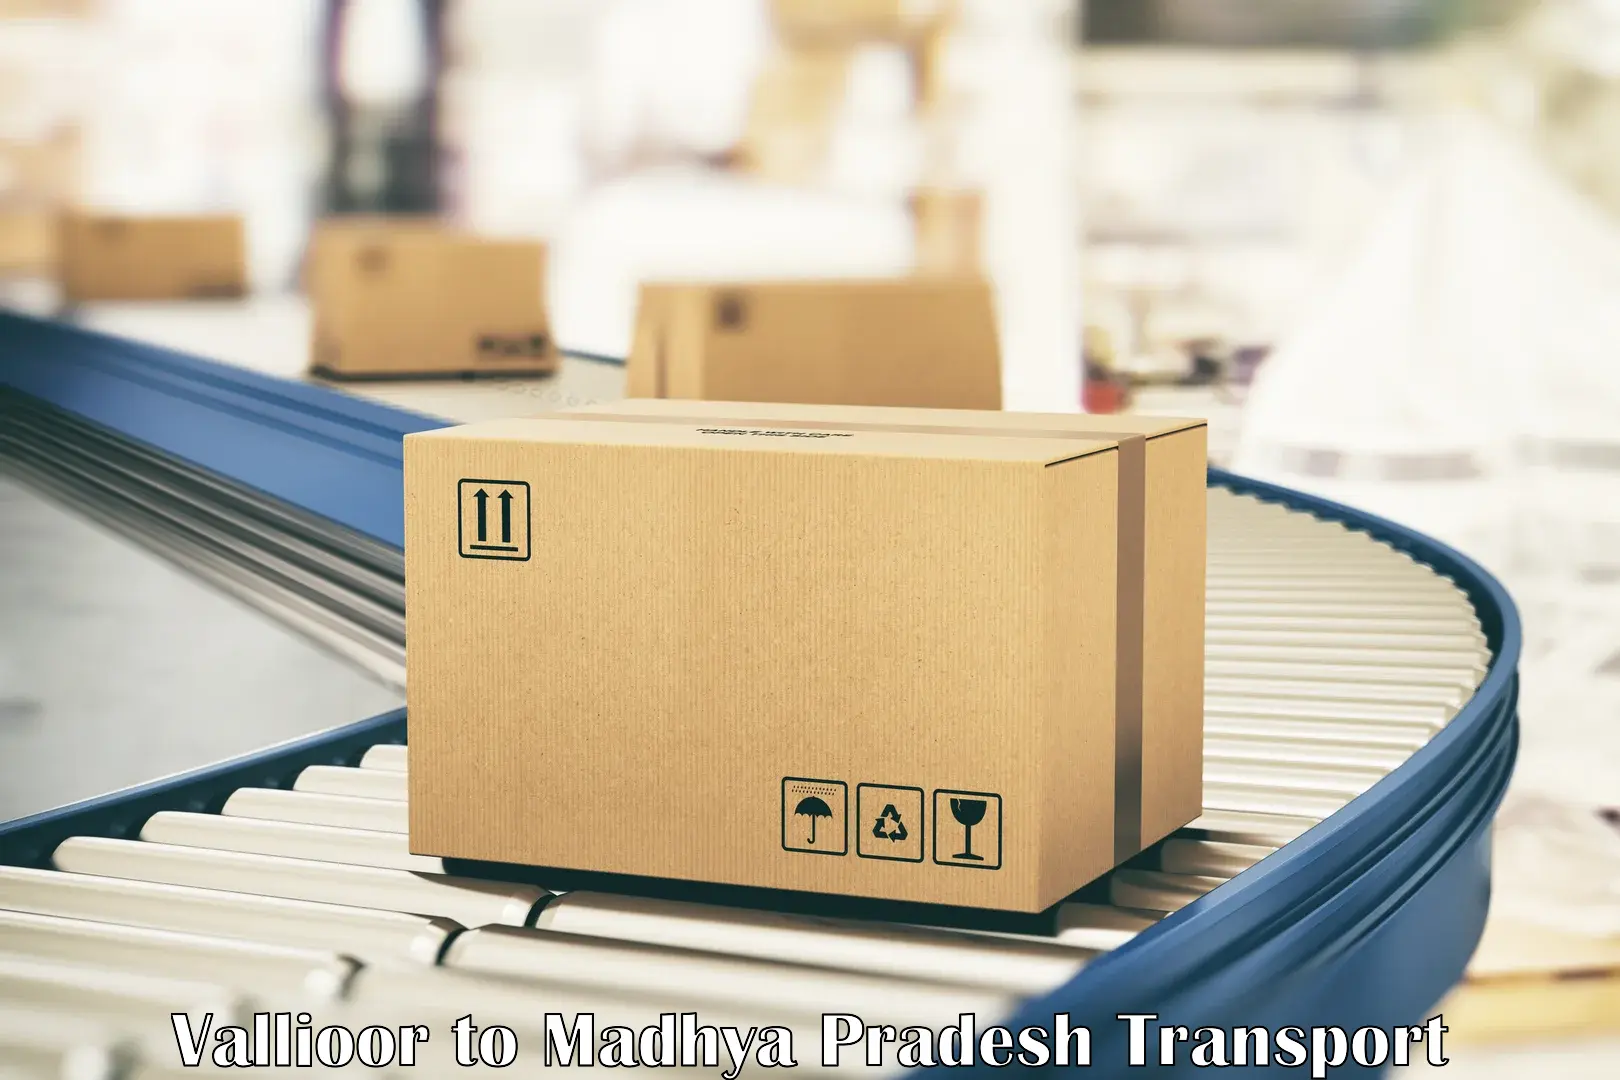 Parcel transport services in Vallioor to Khandwa